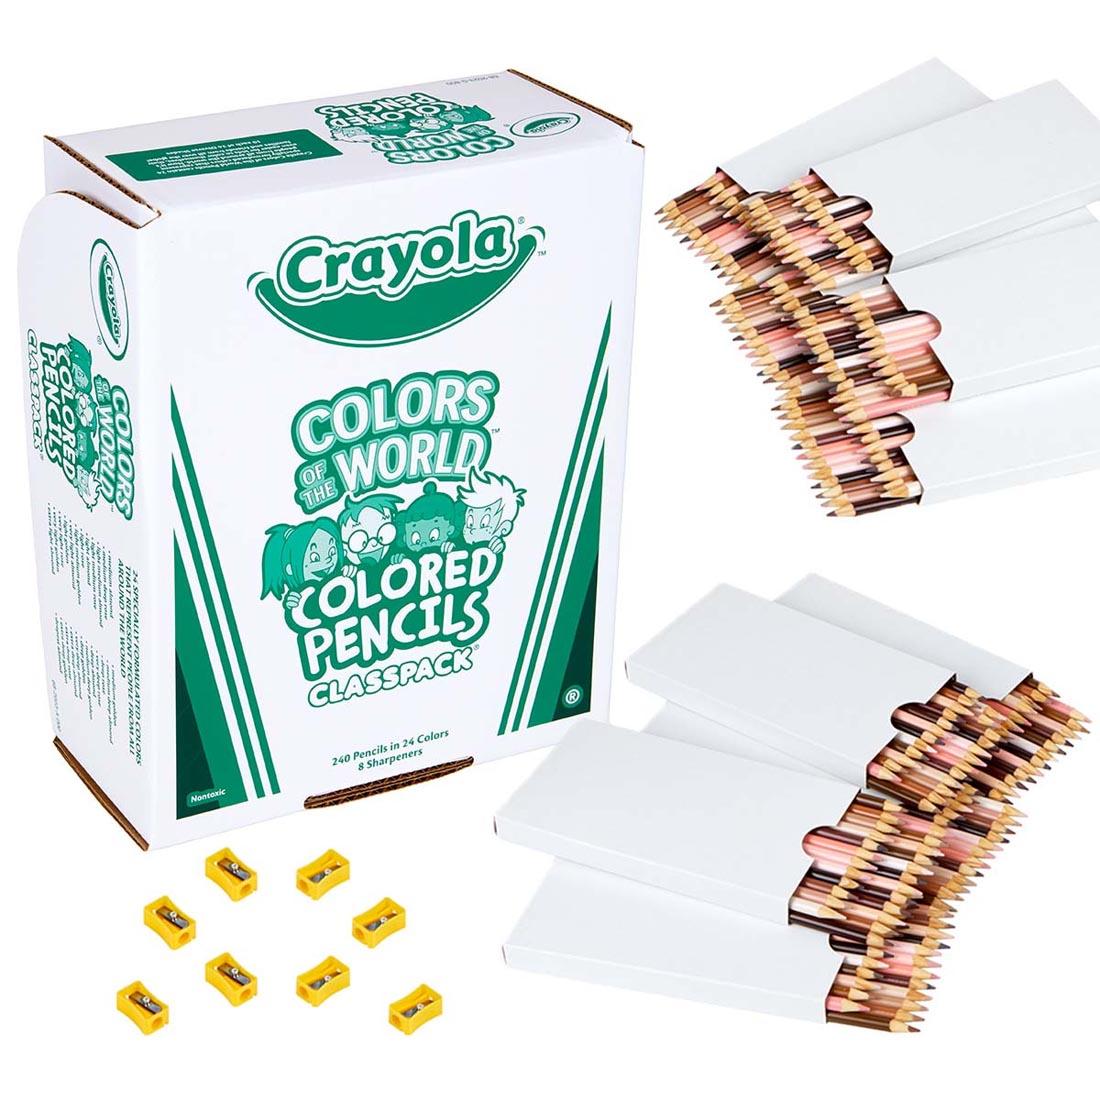 Crayola Colors Of The World Colored Pencil Classpack, with 10 each of 24 colors and 8 sharpeners